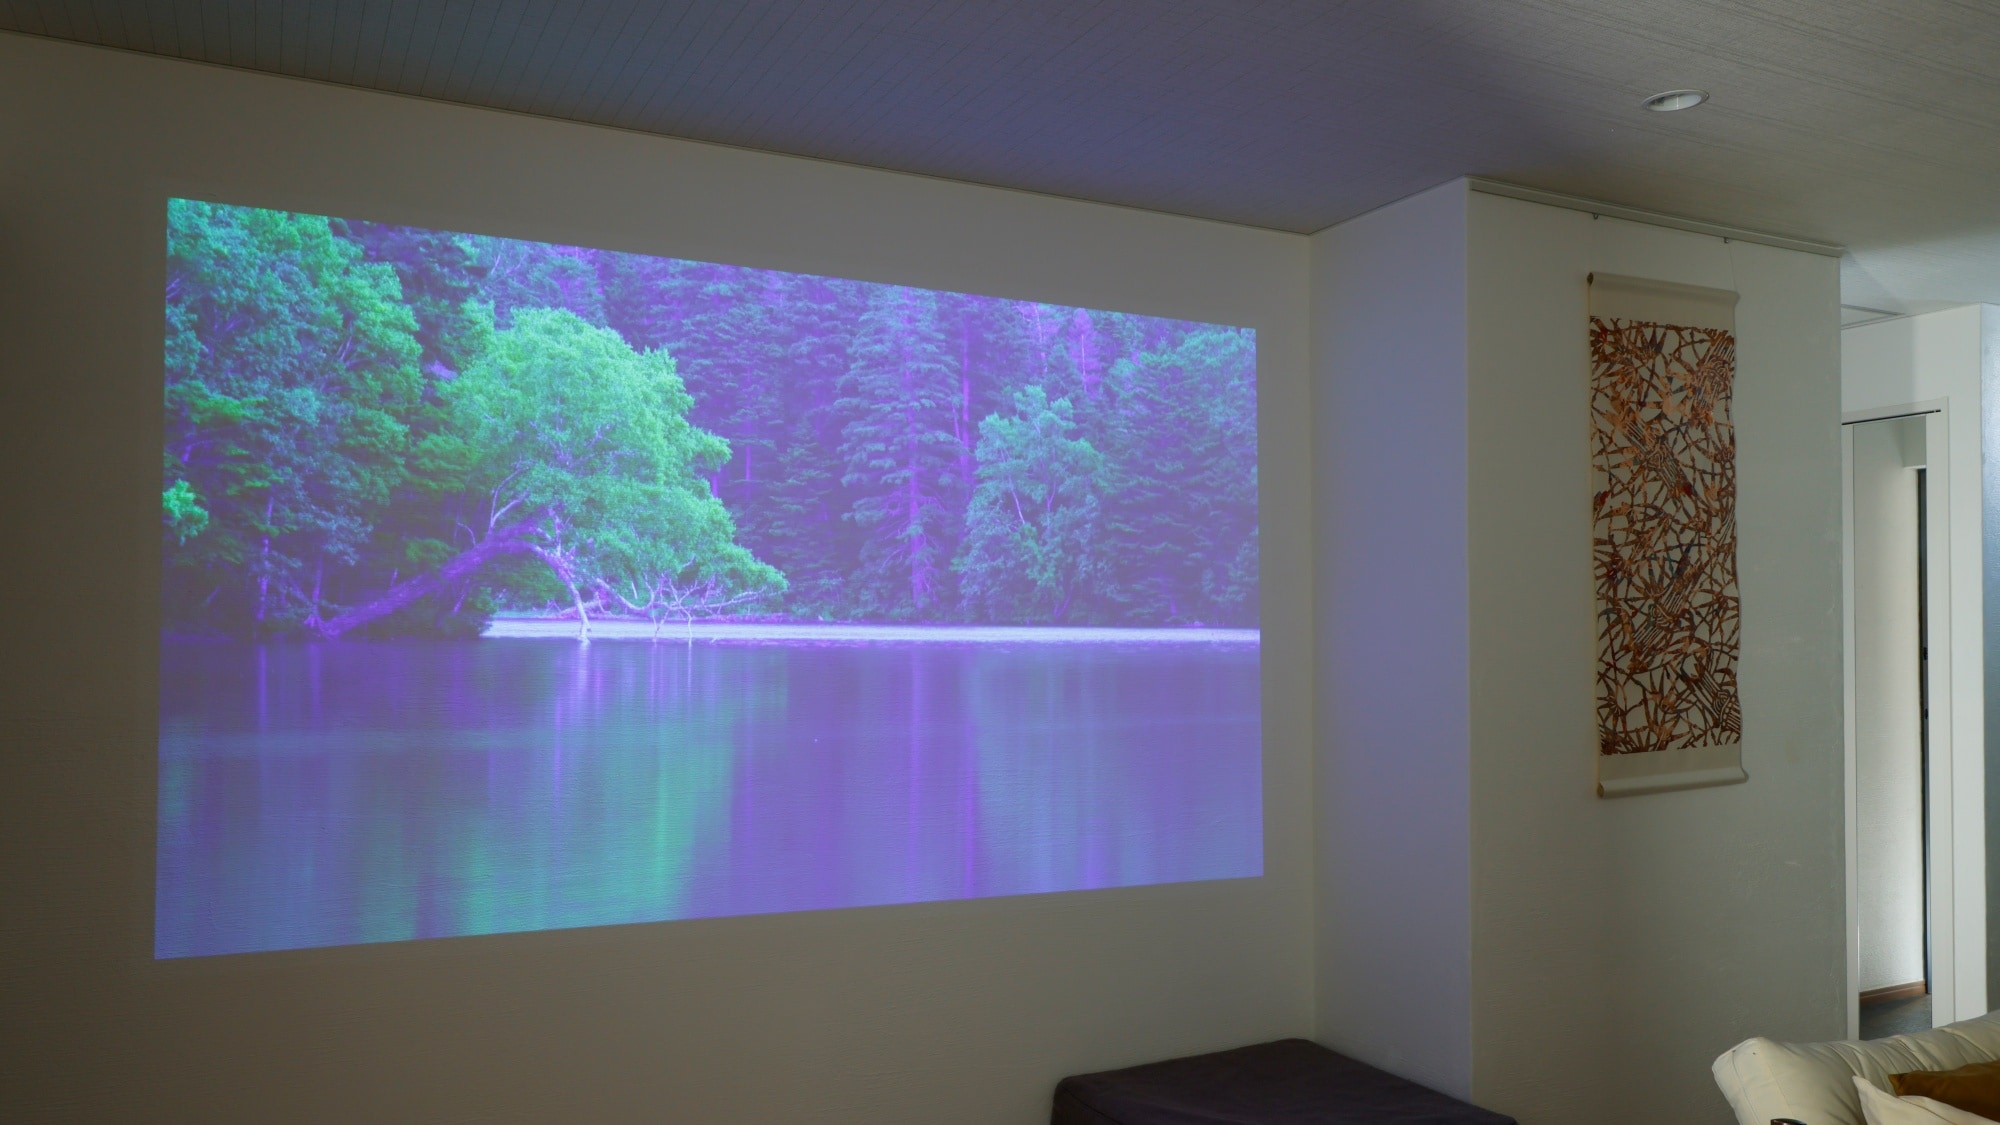 ■ You can enjoy your favorite videos on a large screen with the popIn Aladdin projector.